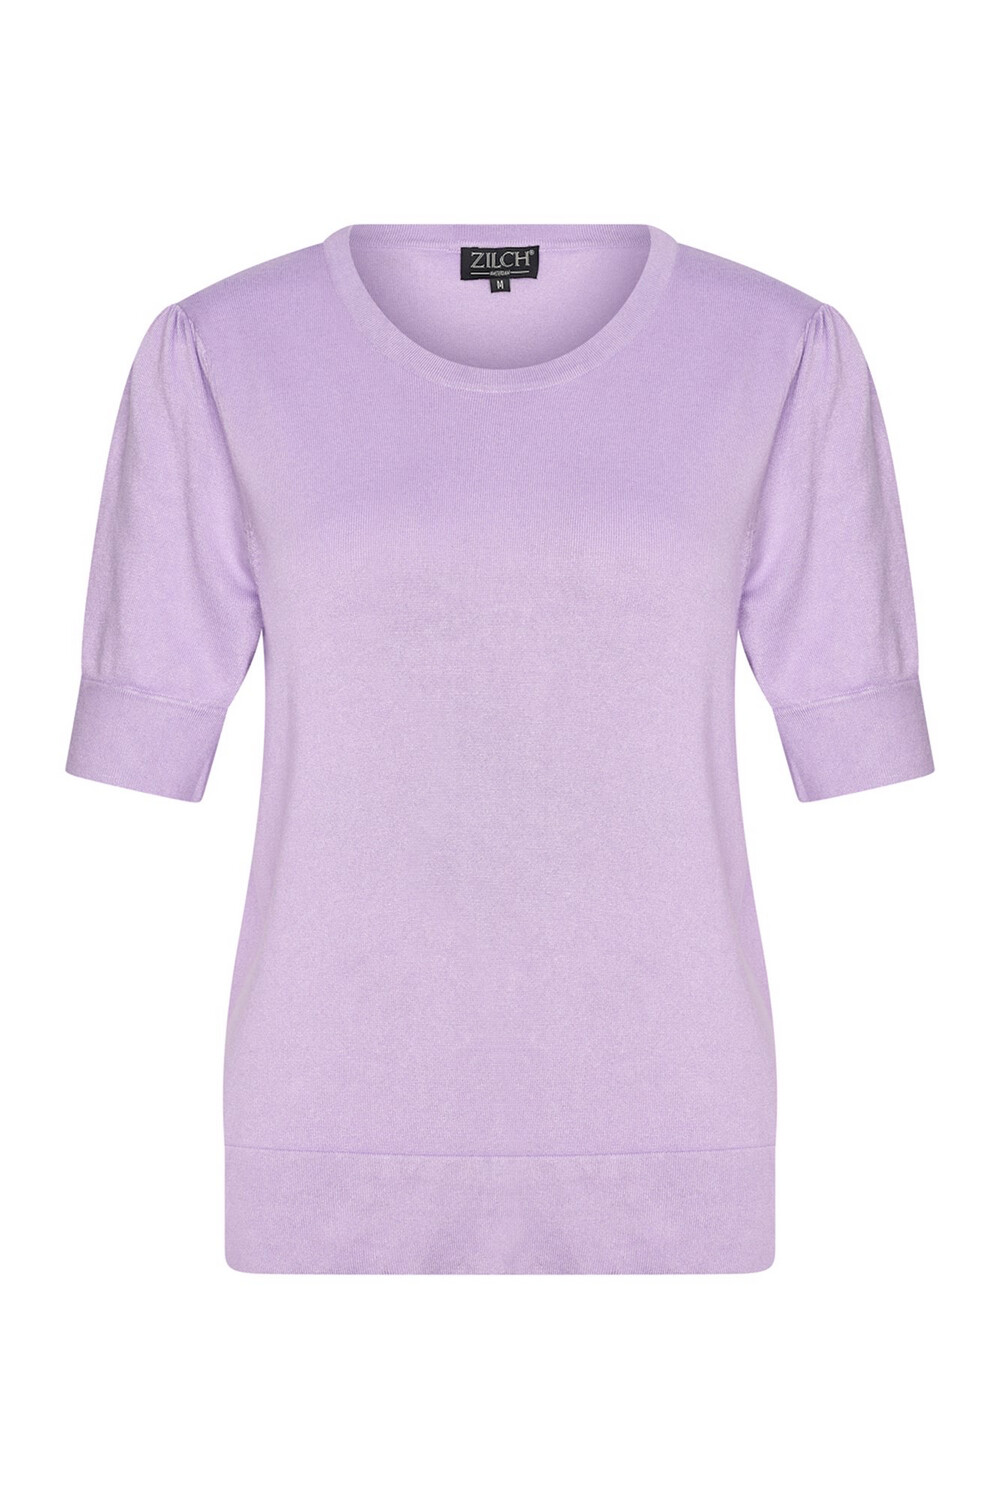 Zilch Pullover Lilac